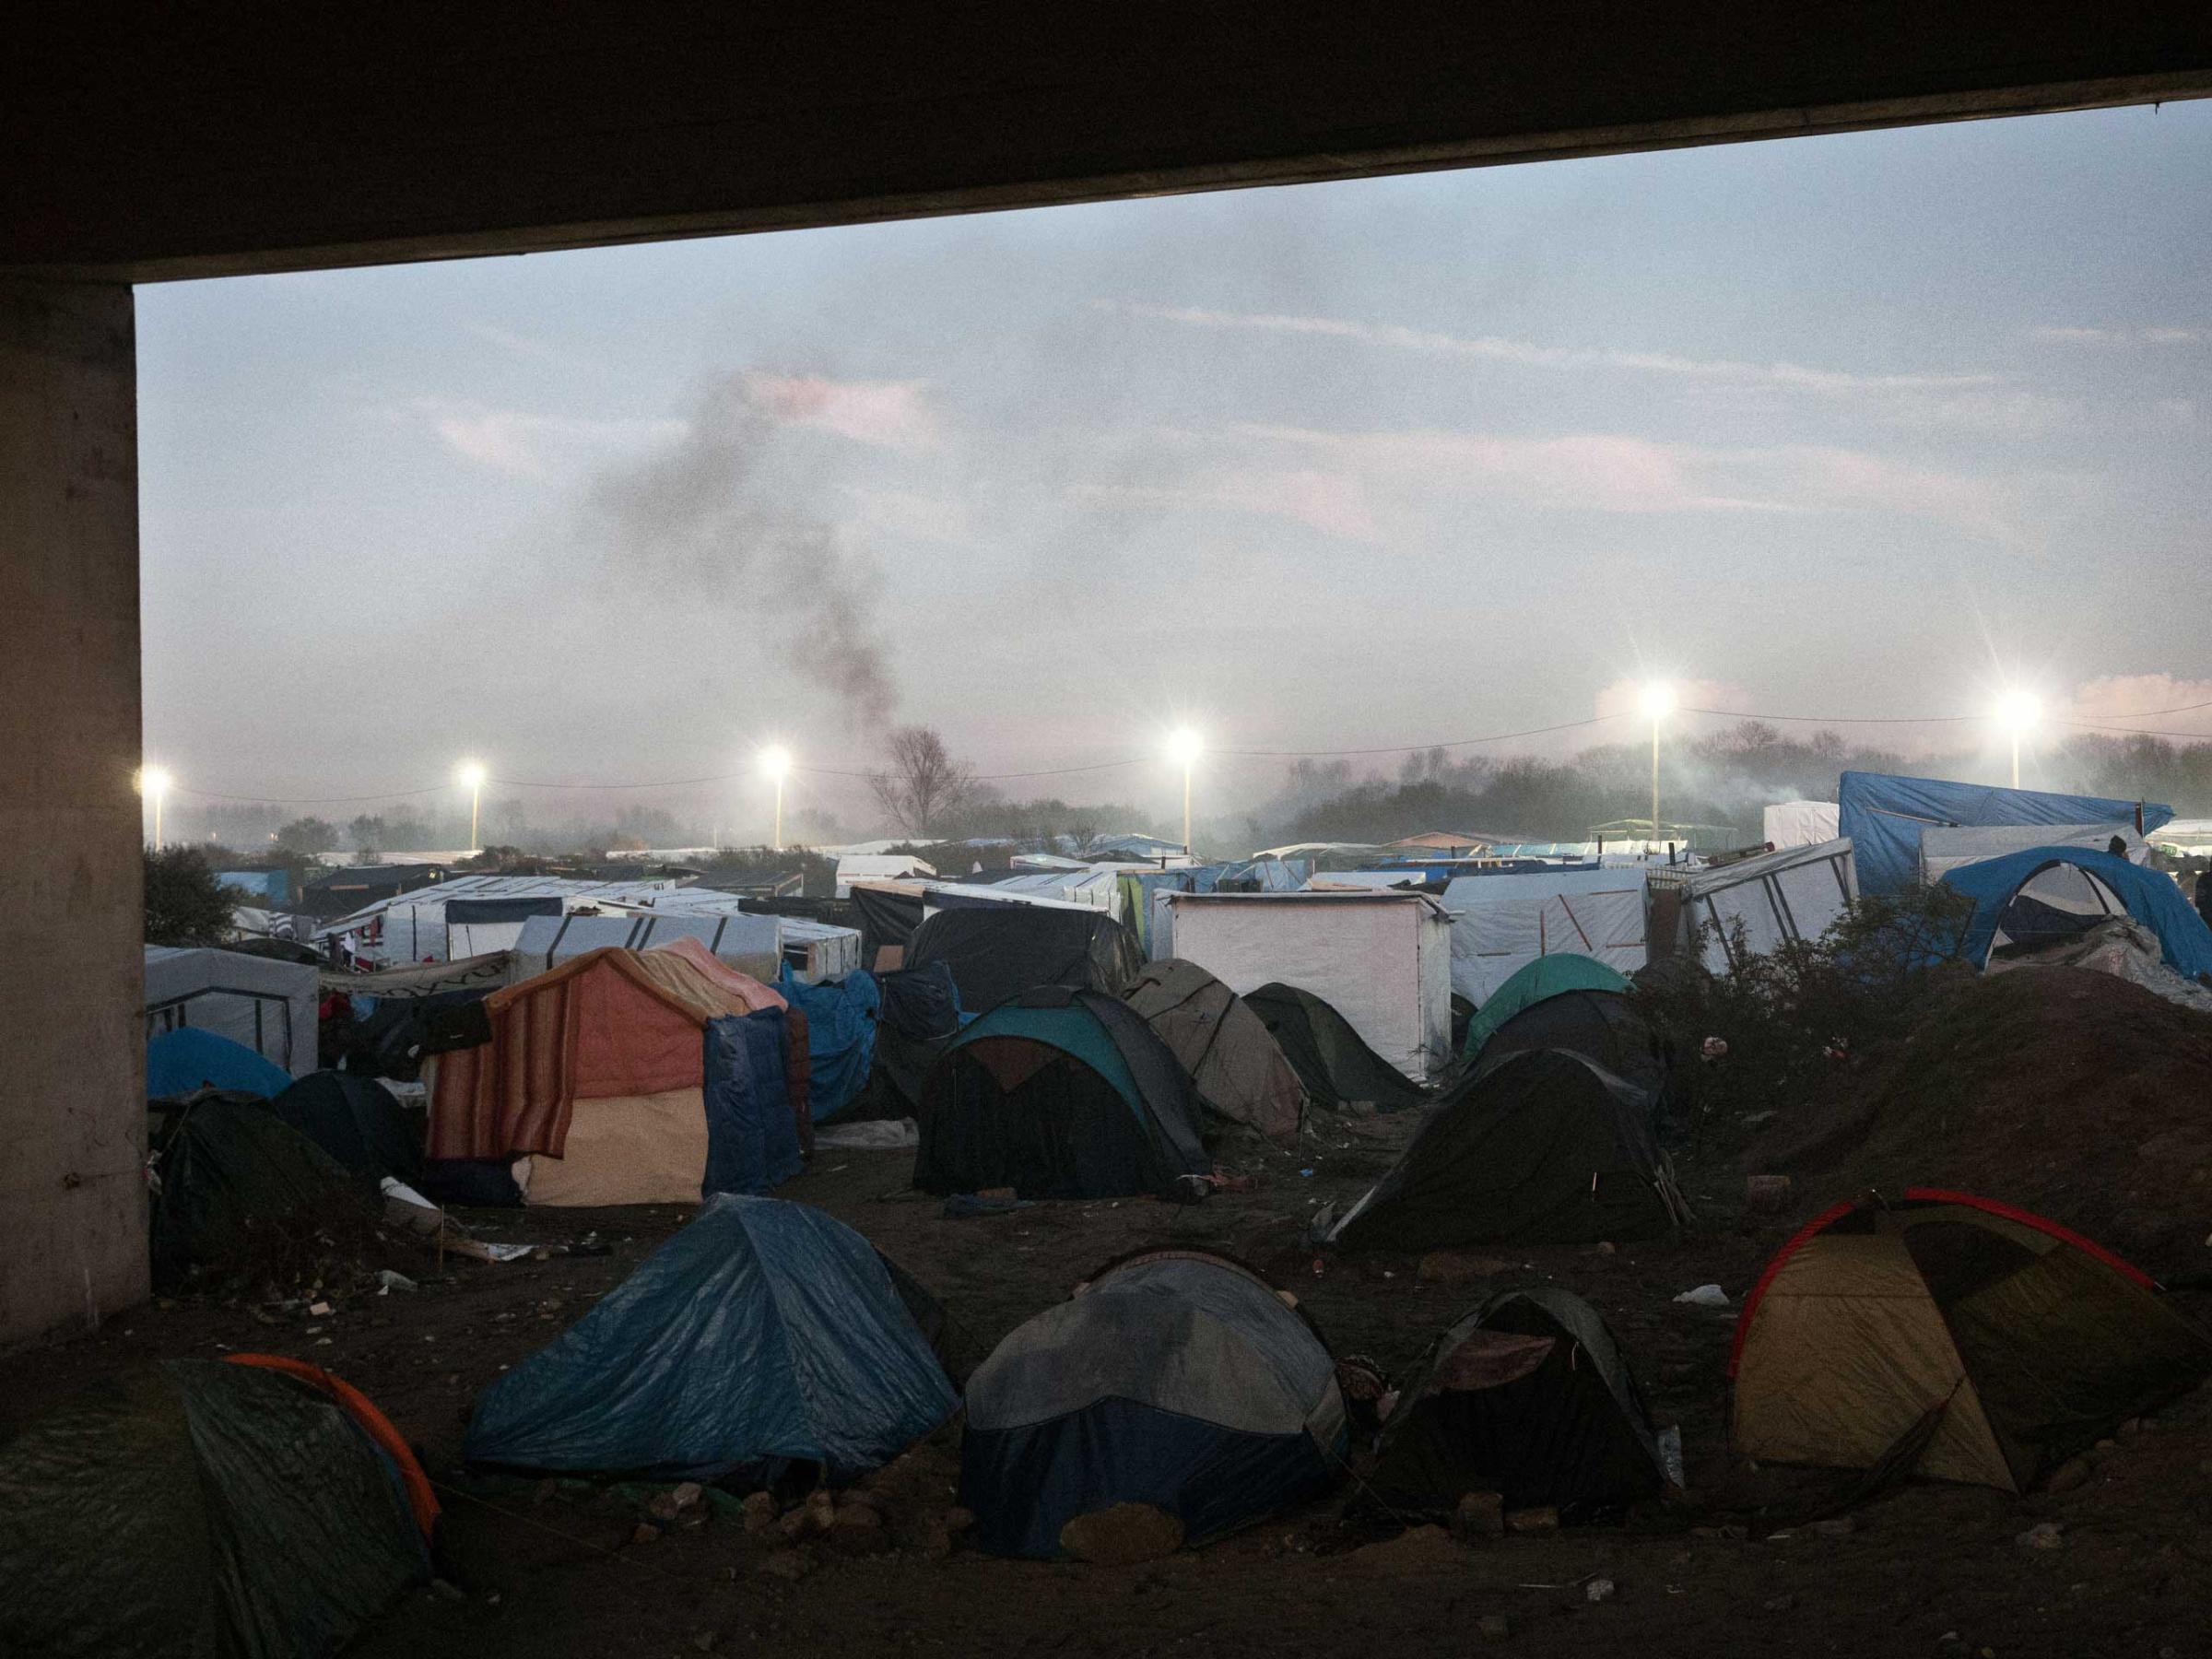 The tents that make the shantytown known as the ÒjungleÓ of Calais, France, where a mix of refugees, asylum seekers and economic migrants from Darfur, Afghanistan, Syria, Iraq, Eritrea live before they attempt to enter the United Kingdom by stowing away on ferries, cars, or trains traveling through the Port of Calais or the Eurotunnel, Nov. 26, 2015.